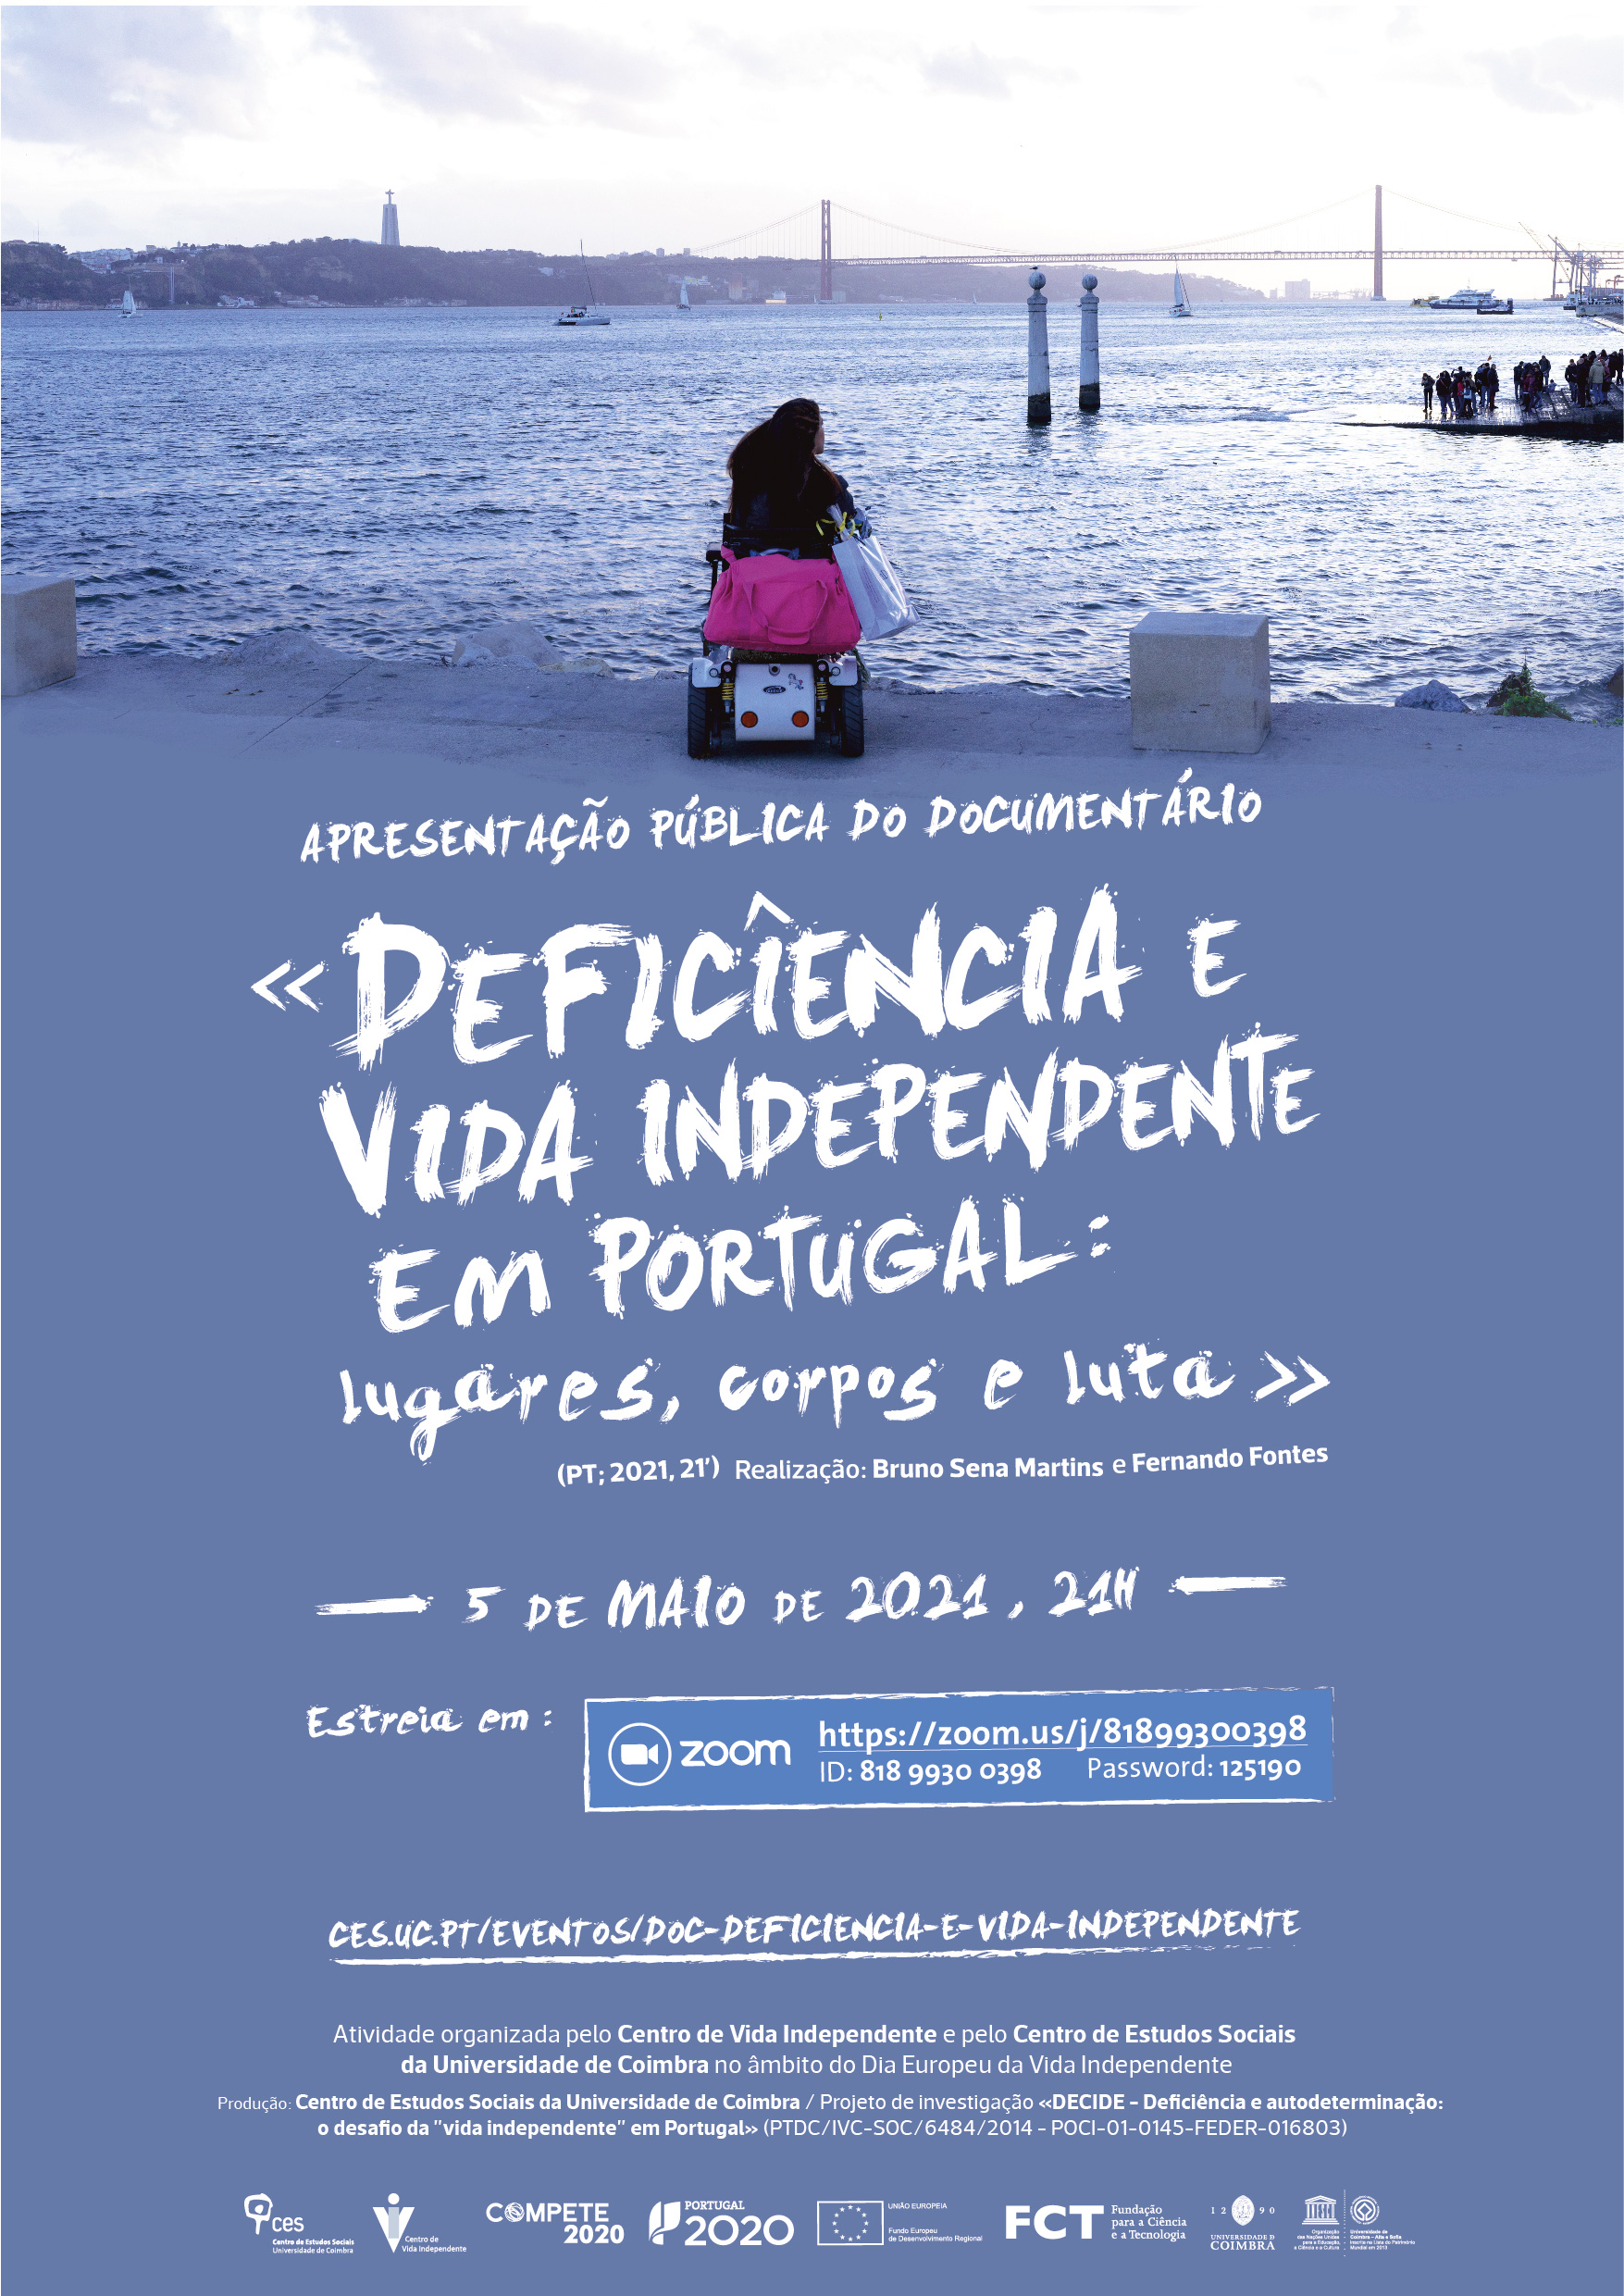 Disability and Independent Living in Portugal: places, bodies and struggles <span id="edit_34053"><script>$(function() { $('#edit_34053').load( "/myces/user/editobj.php?tipo=evento&id=34053" ); });</script></span>